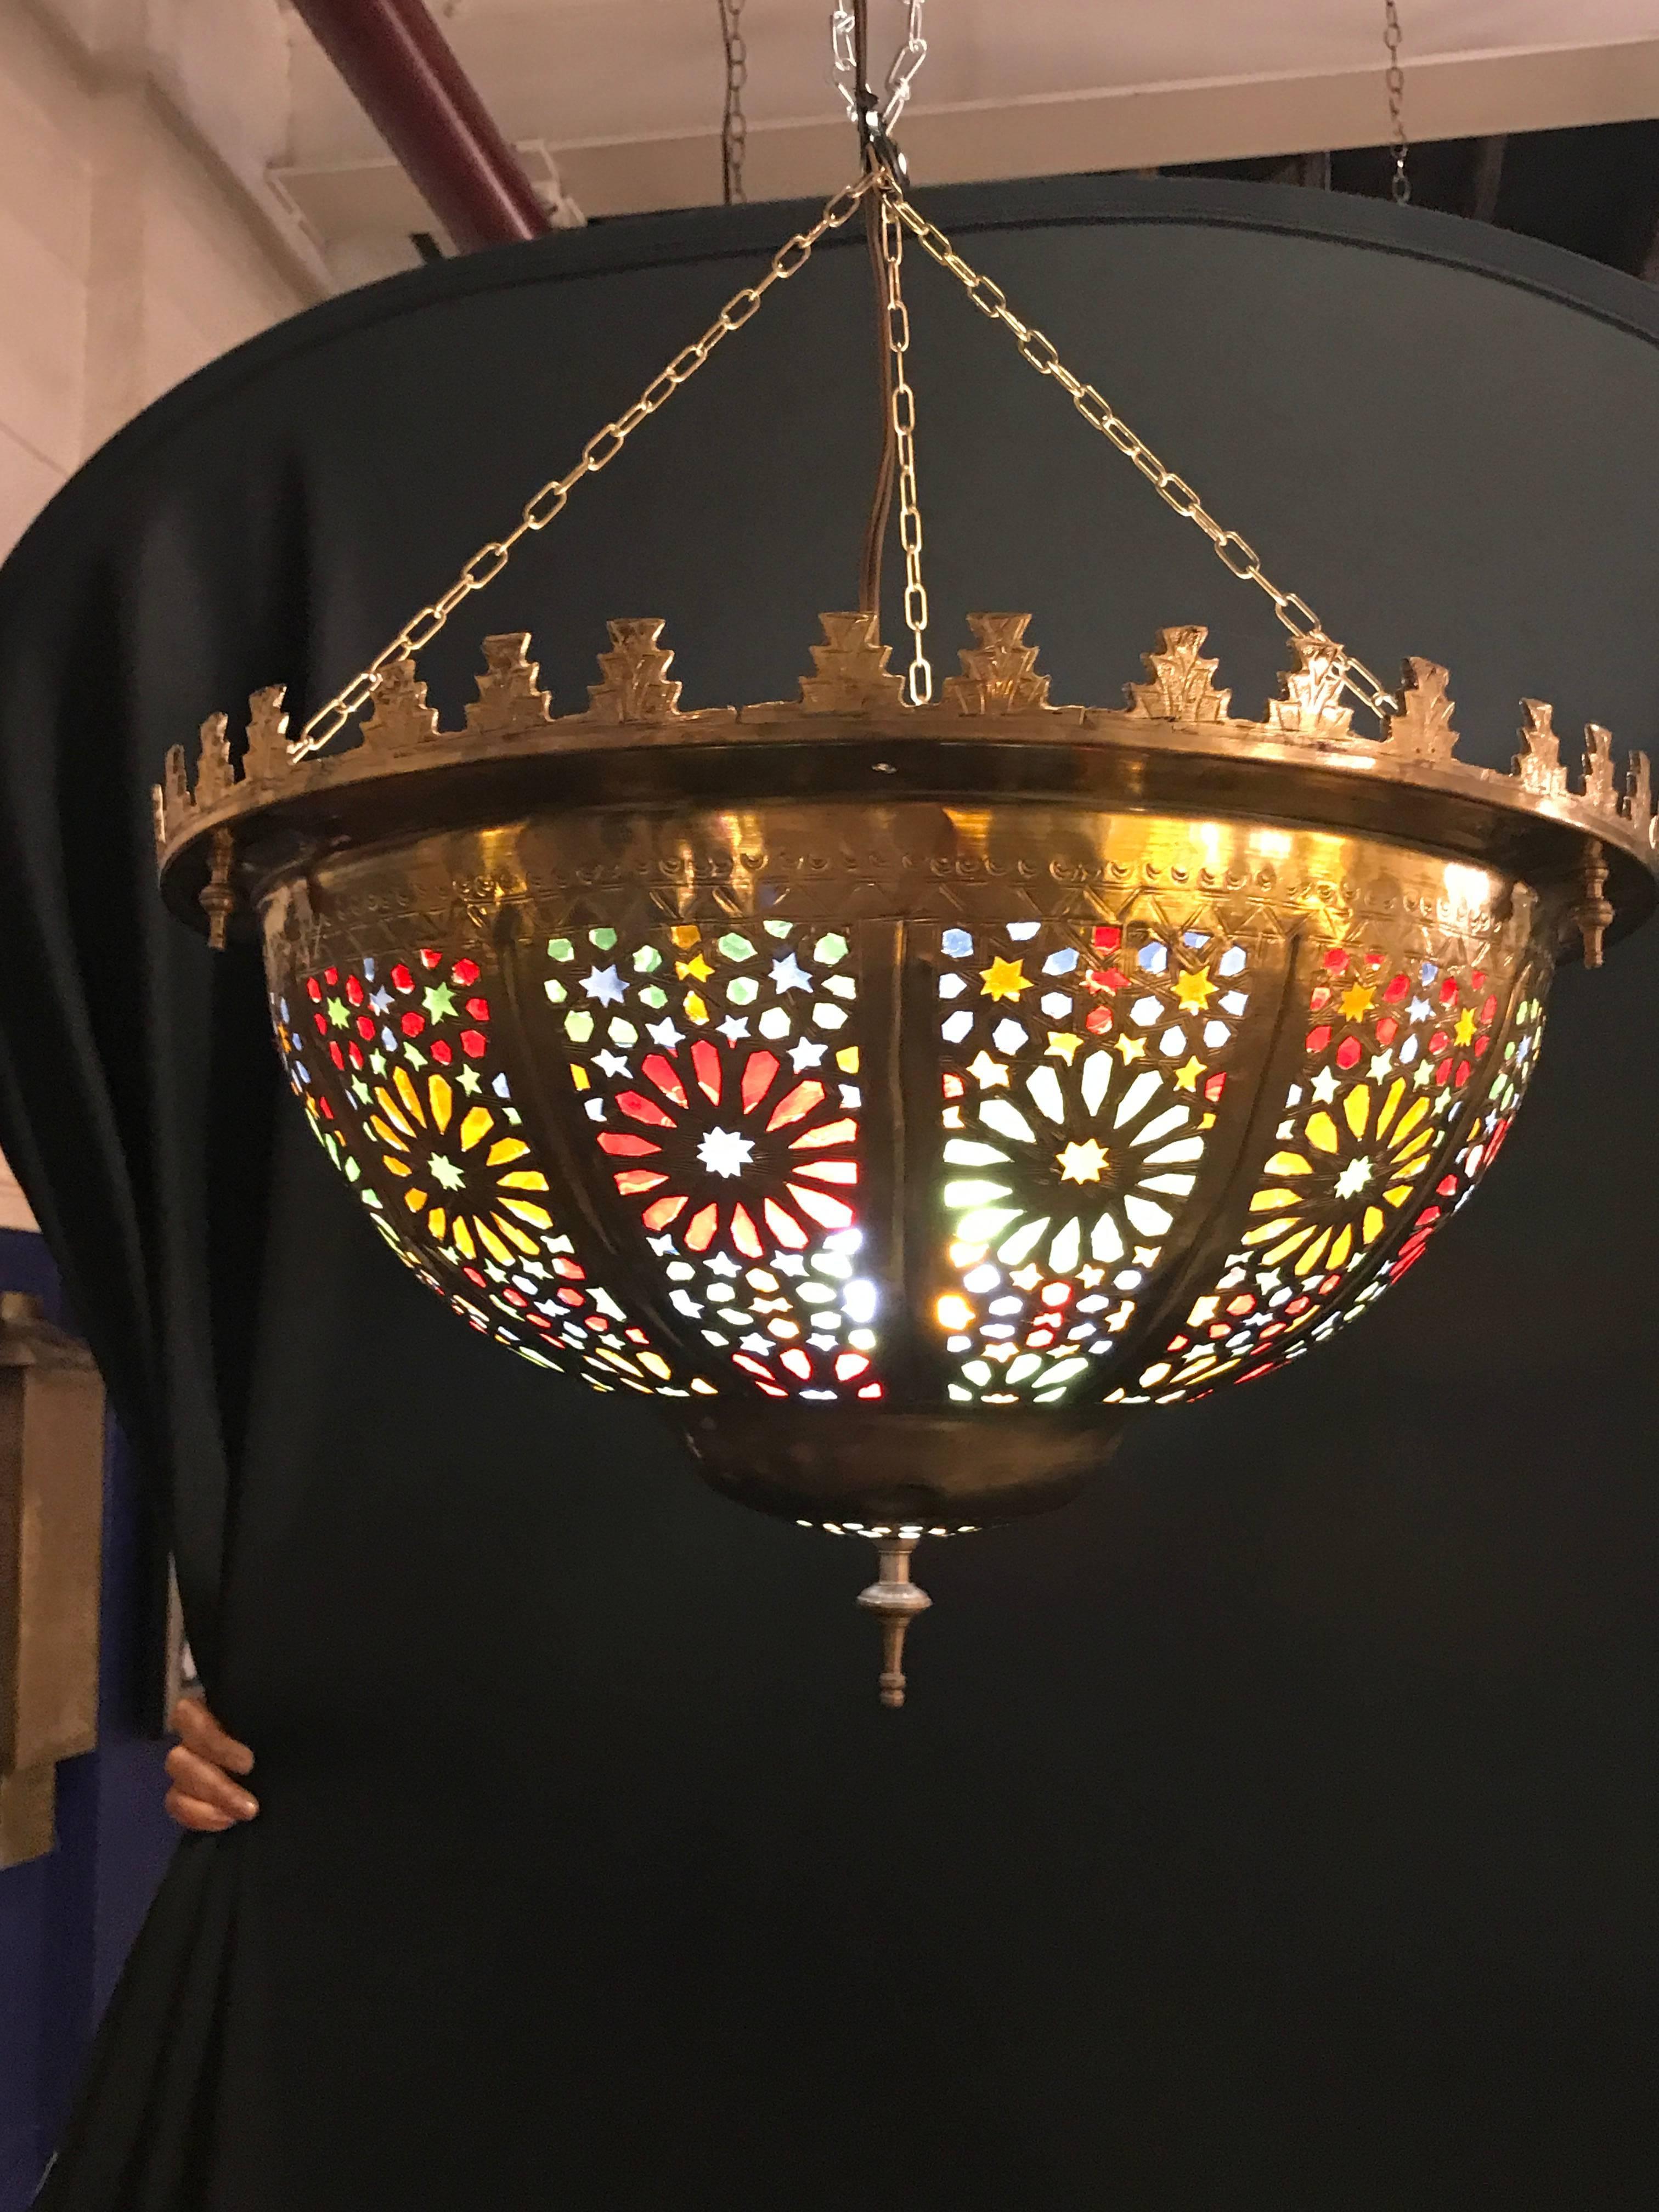 This captivating and elegant golden-colored round-shaped lamp has been created in a Moorish style and features individually wrought multicolored glass panes and elaborate hand tooled design work. Adds exotic distinction to any living space. Actual